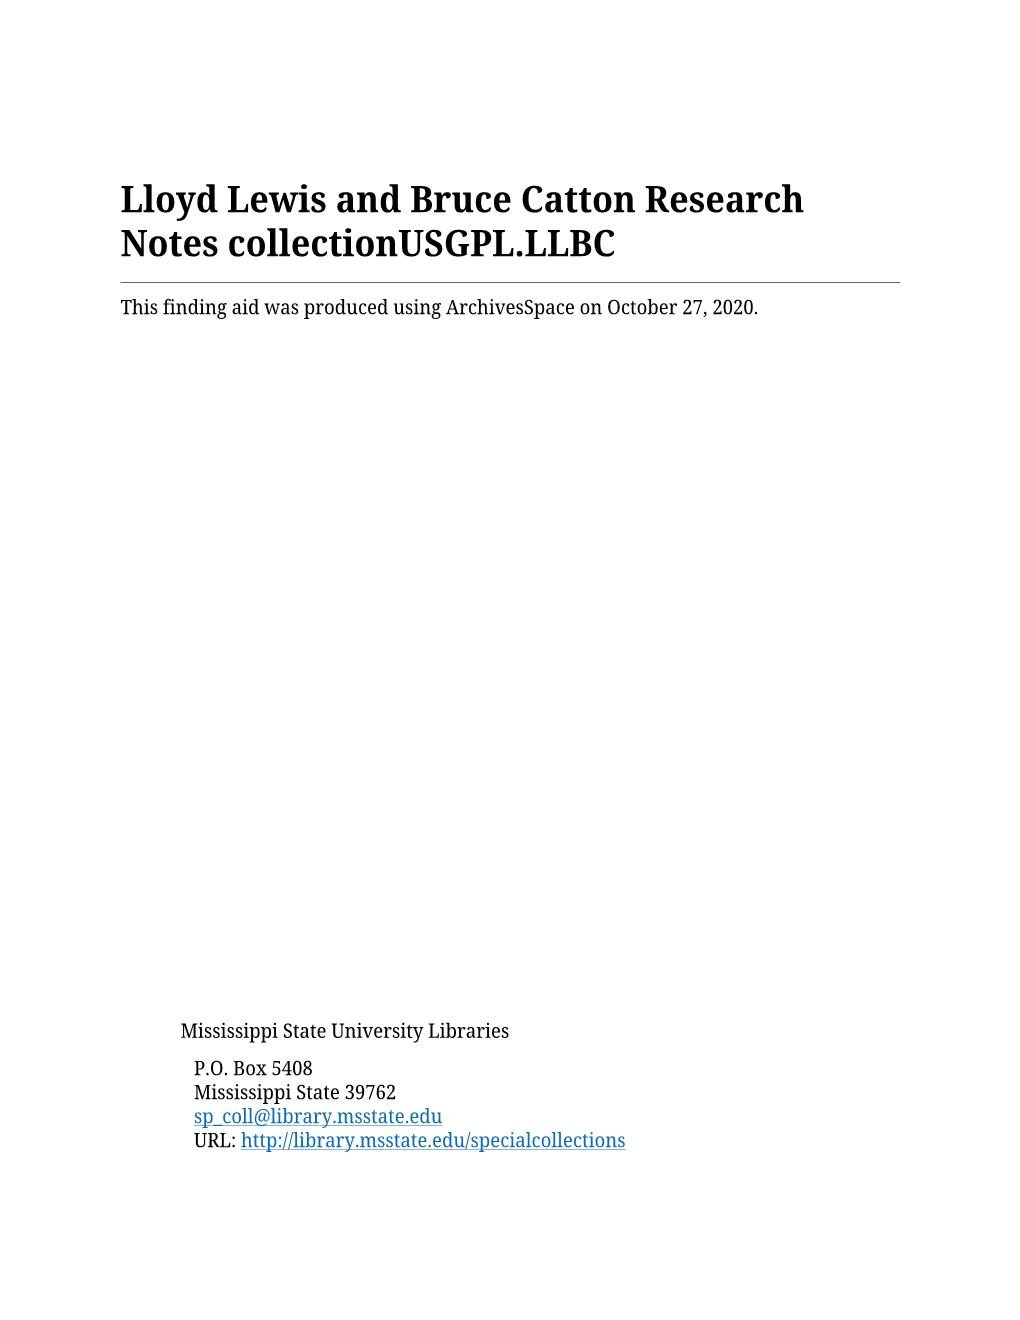 Lloyd Lewis and Bruce Catton Research Notes Collectionusgpl.LLBC